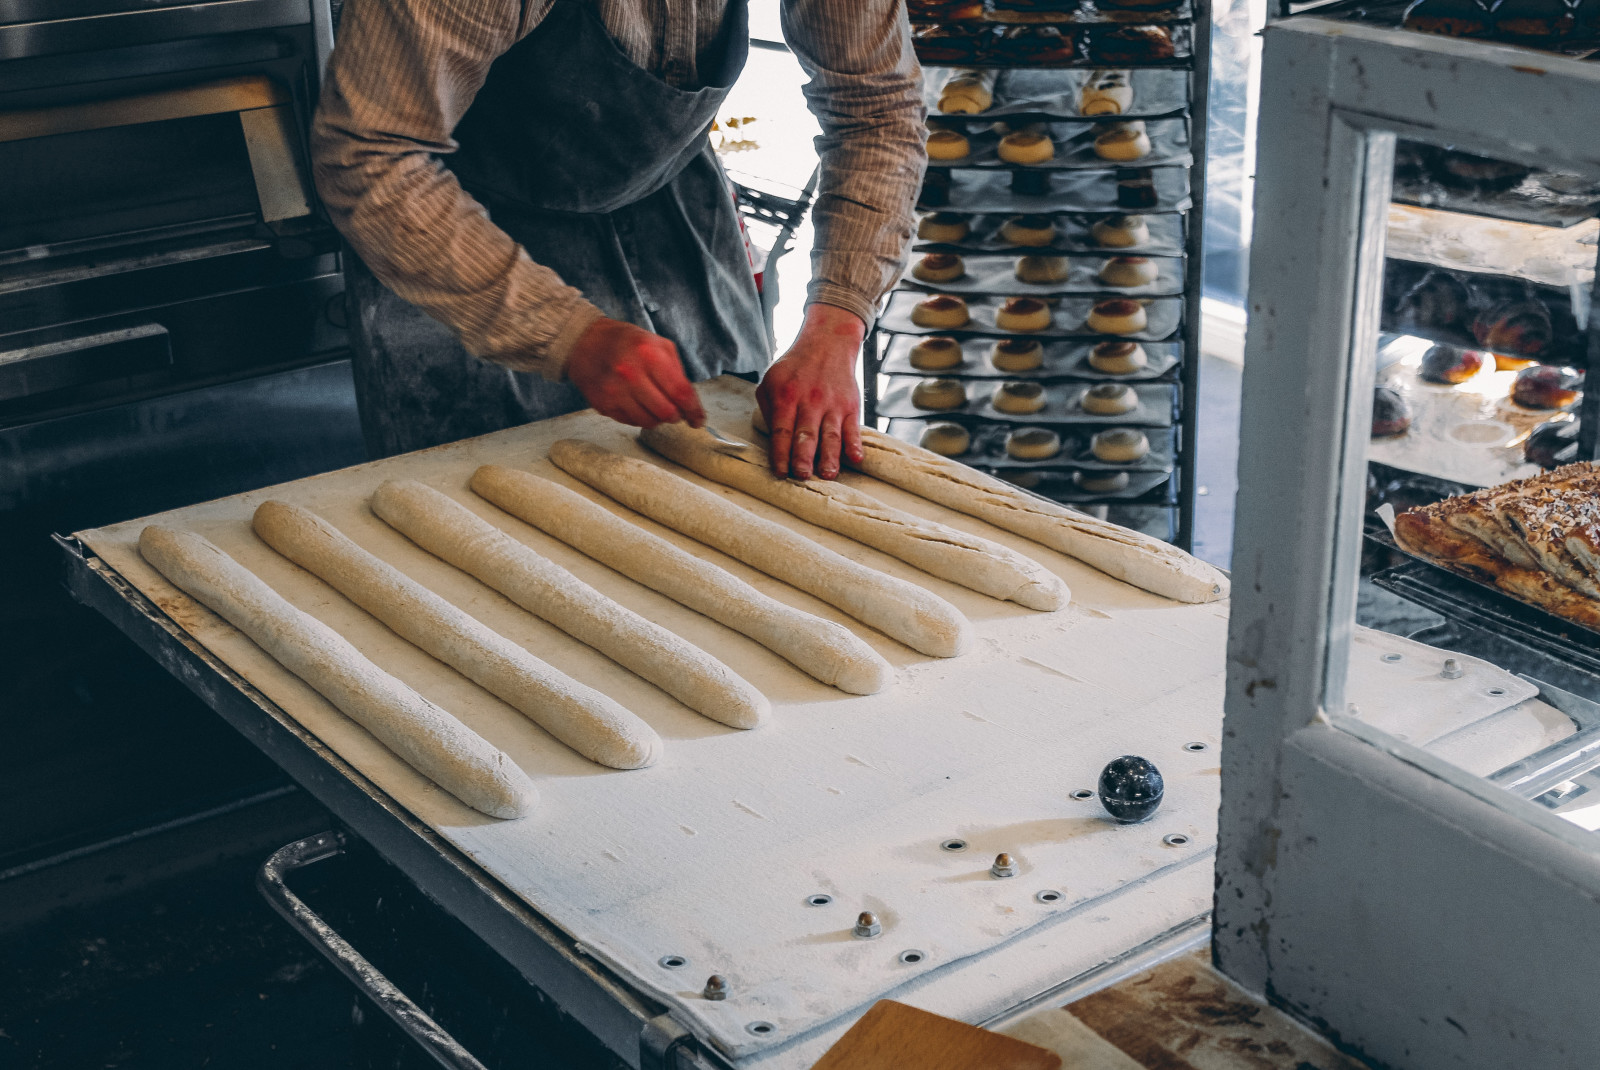 A baker in Iceland working on seven white dough baguettes with red gloves and a blue apron.